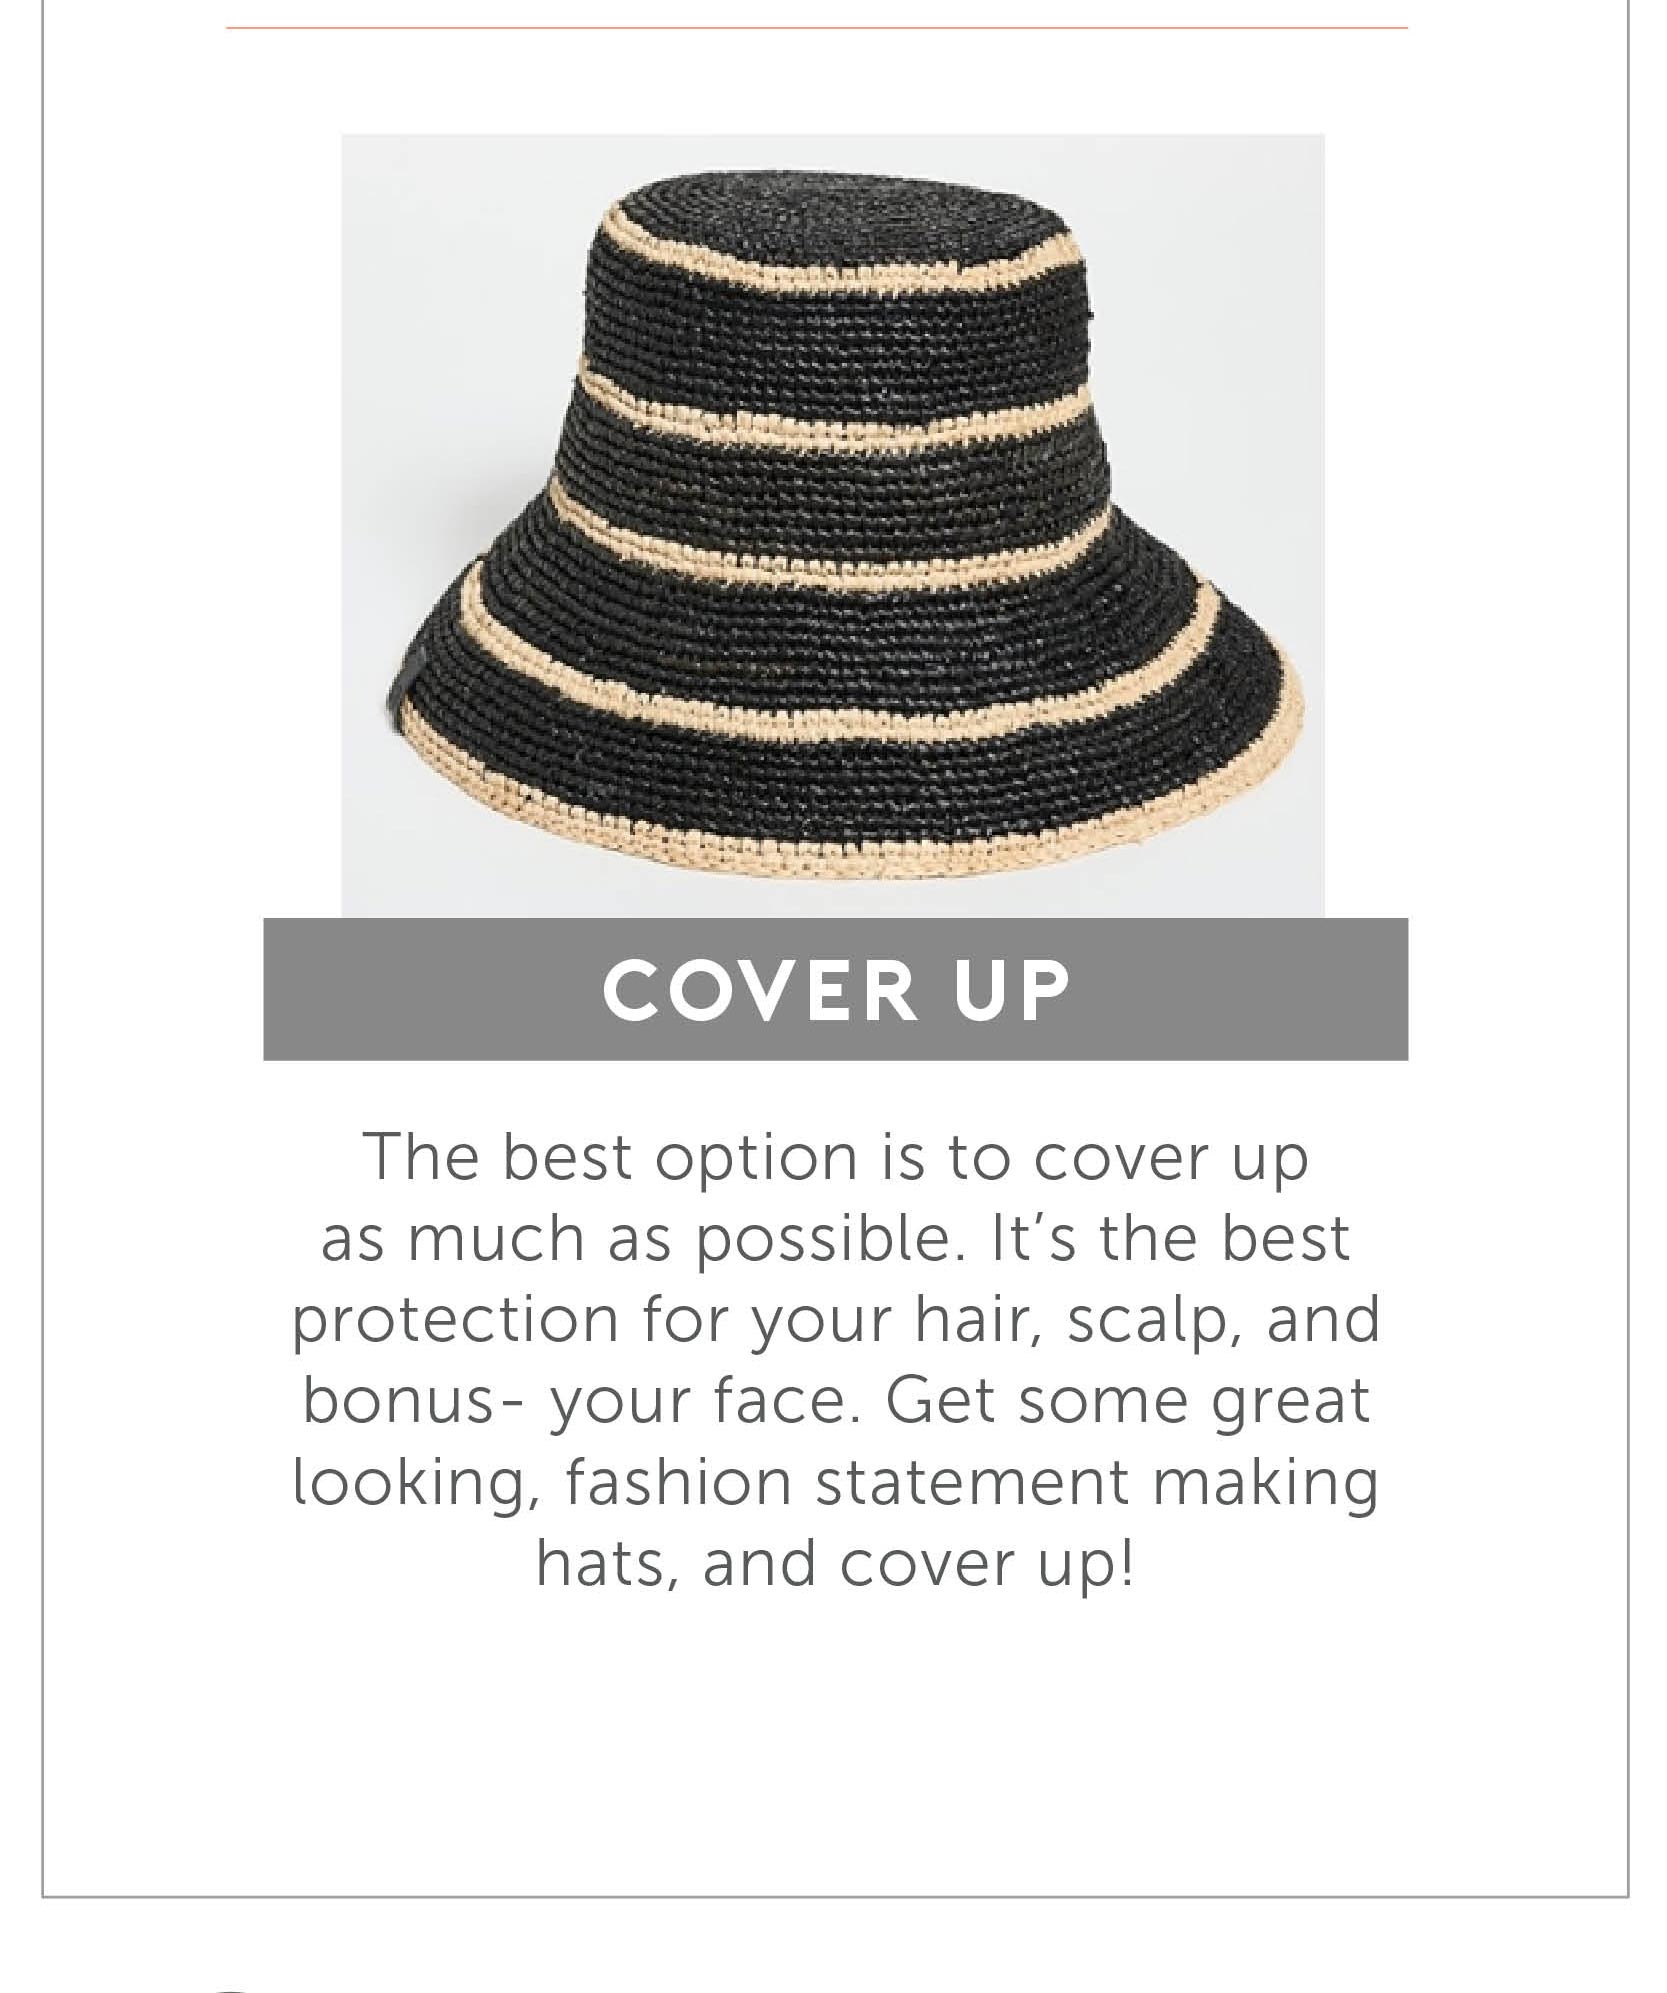 Cover Up - The best option is to cover up as much as possible. It’s the best protection for your hair, scalp, and bonus- your face. Get some great looking, fashion statement making hats, and cover up!